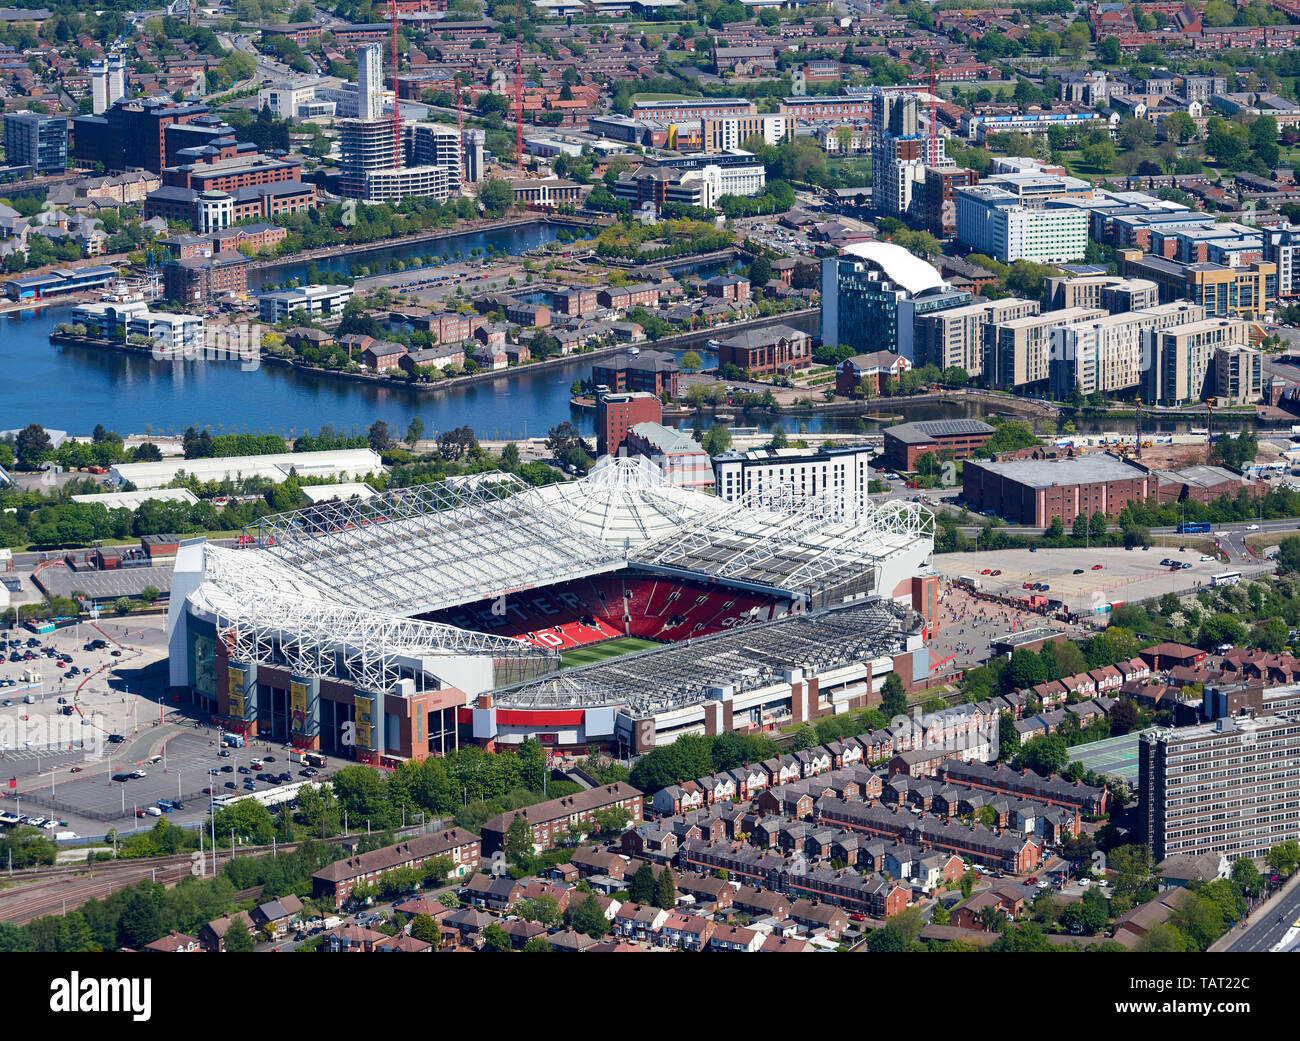 Old Trafford, home of Manchester United,  and Salford Quays, City of Salford, Manchester, North West England, UK Stock Photo